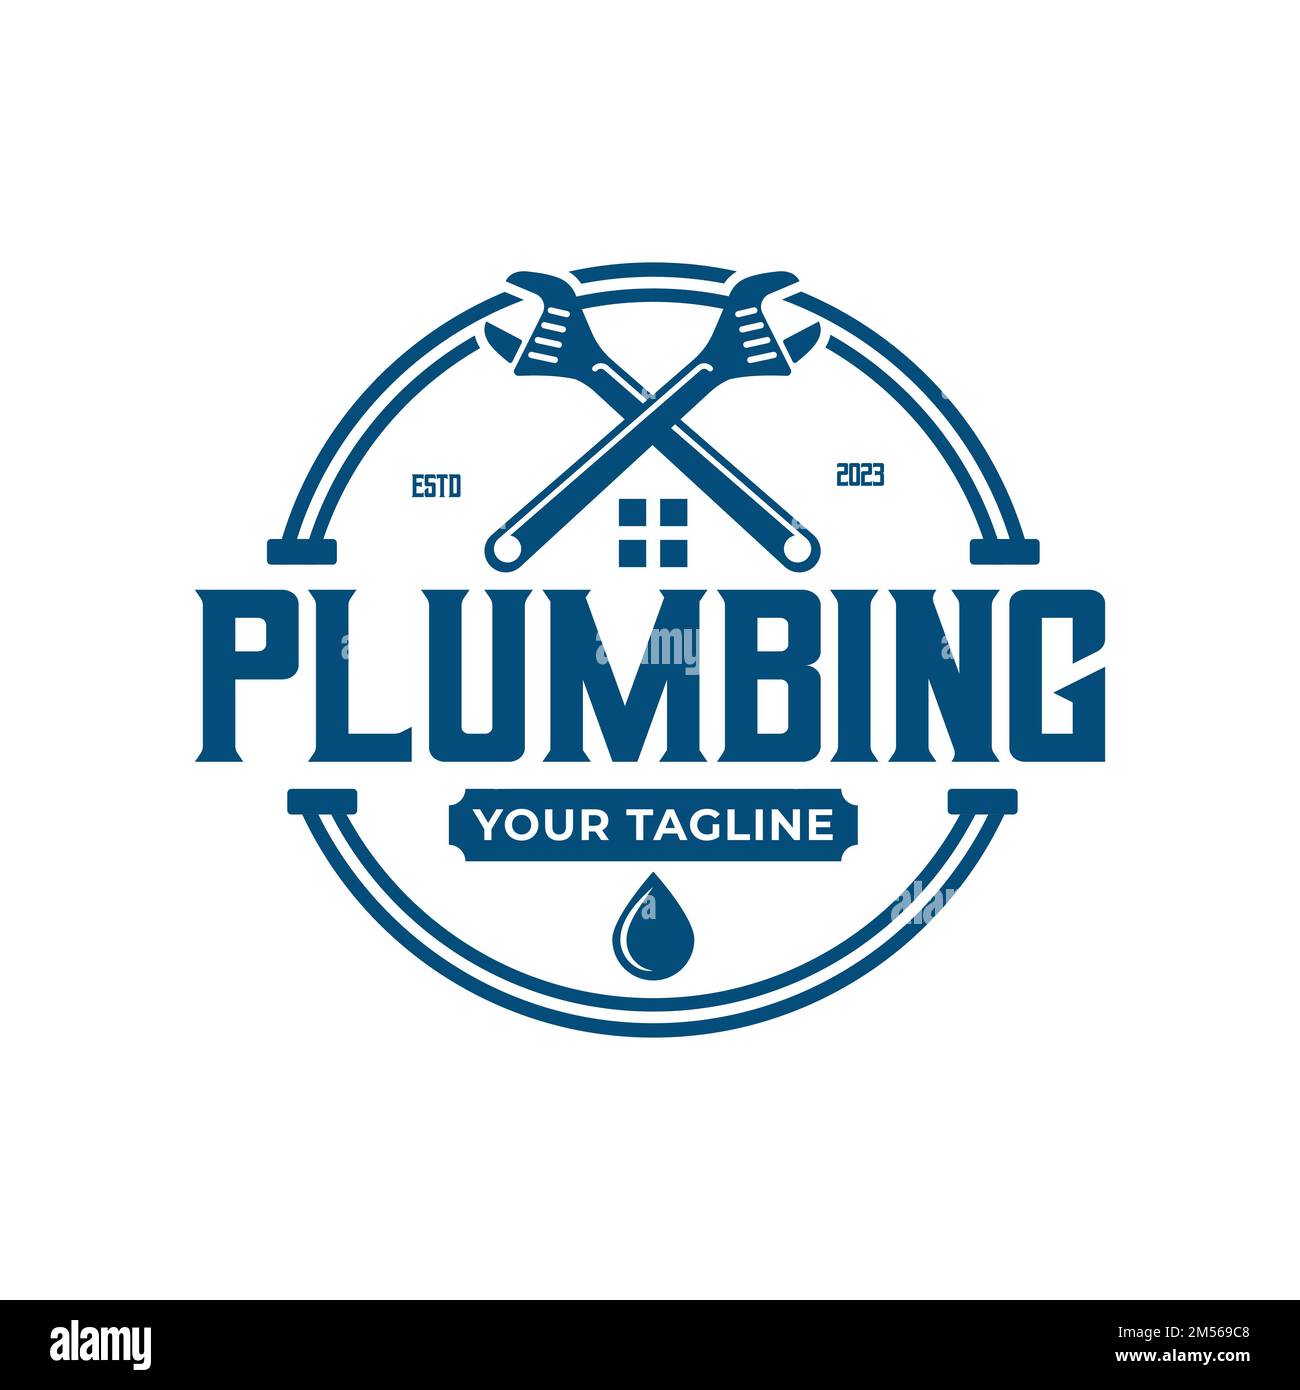 Plumbing logo template, in retro or vintage style, plumber logo for professional business concept emblem design Stock Vector